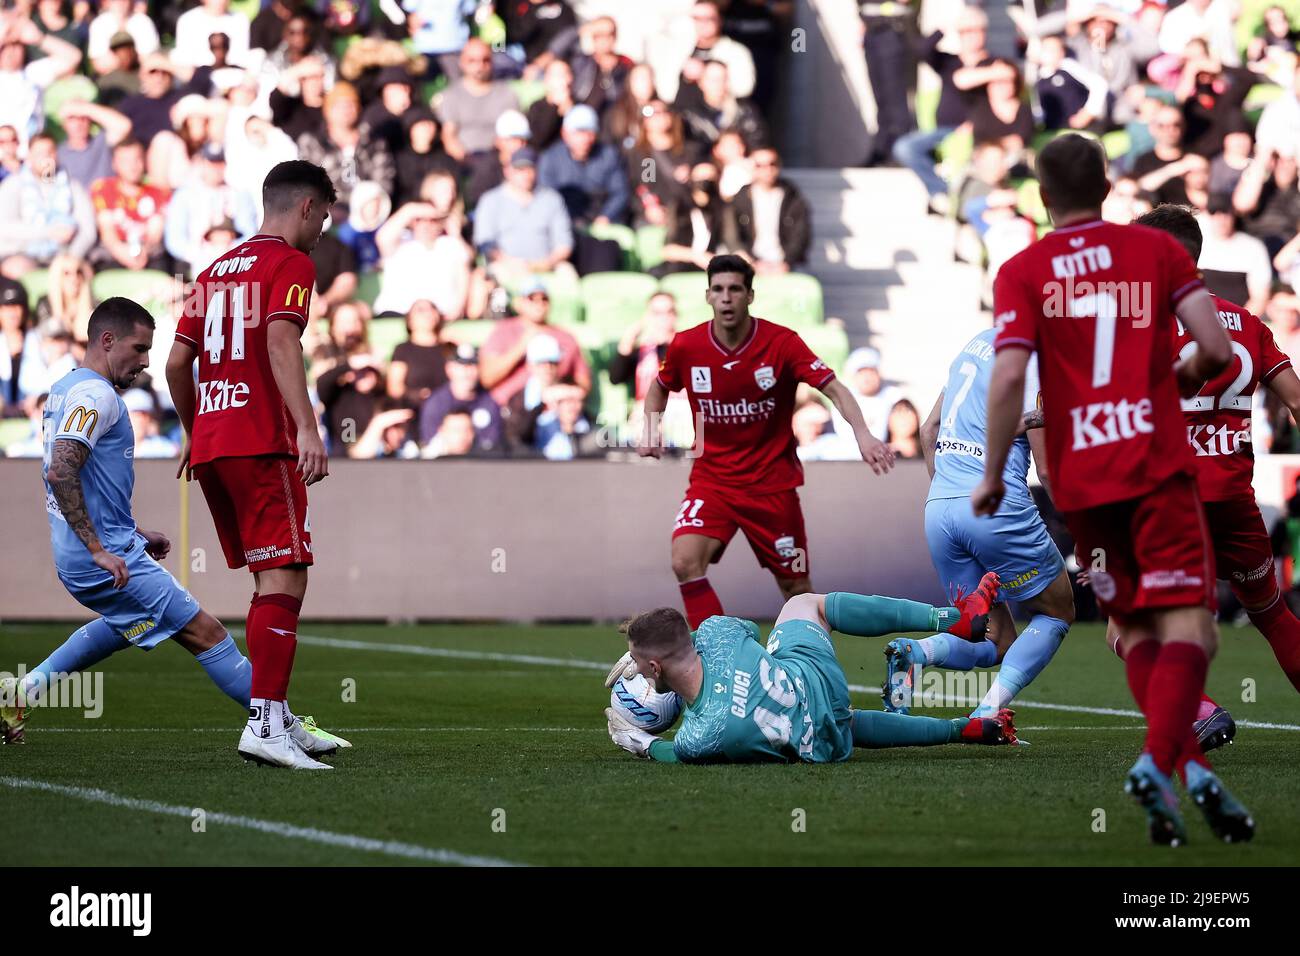 Melbourne, Australia, 22 May, 2022. Joe Gauci of Adelaide United catches the ball during the A-League Semi Final soccer match between Melbourne City FC and Adelaide United at AAMI Park on May 22, 2022 in Melbourne, Australia. Credit: Dave Hewison/Speed Media/Alamy Live News Stock Photo